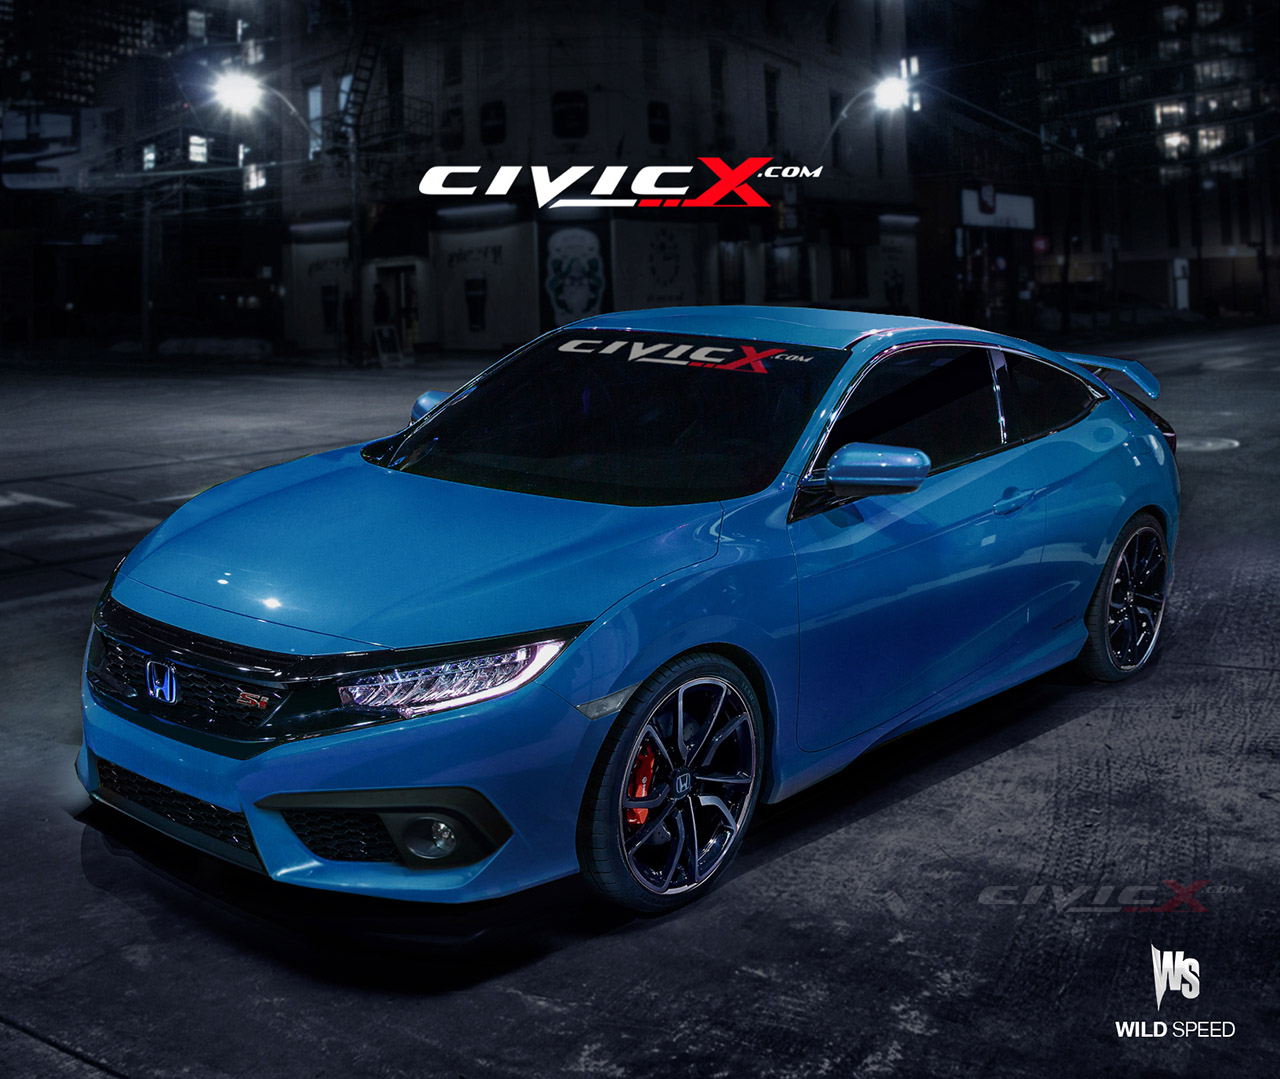 In the recent Los Angeles Auto Show, Honda unveiled their all-new 10th generation Civic sedan. The new model also comes in LX and certain EX-models that showcases light, sharp handling and an efficient, 1.5-liter turbocharged engine.